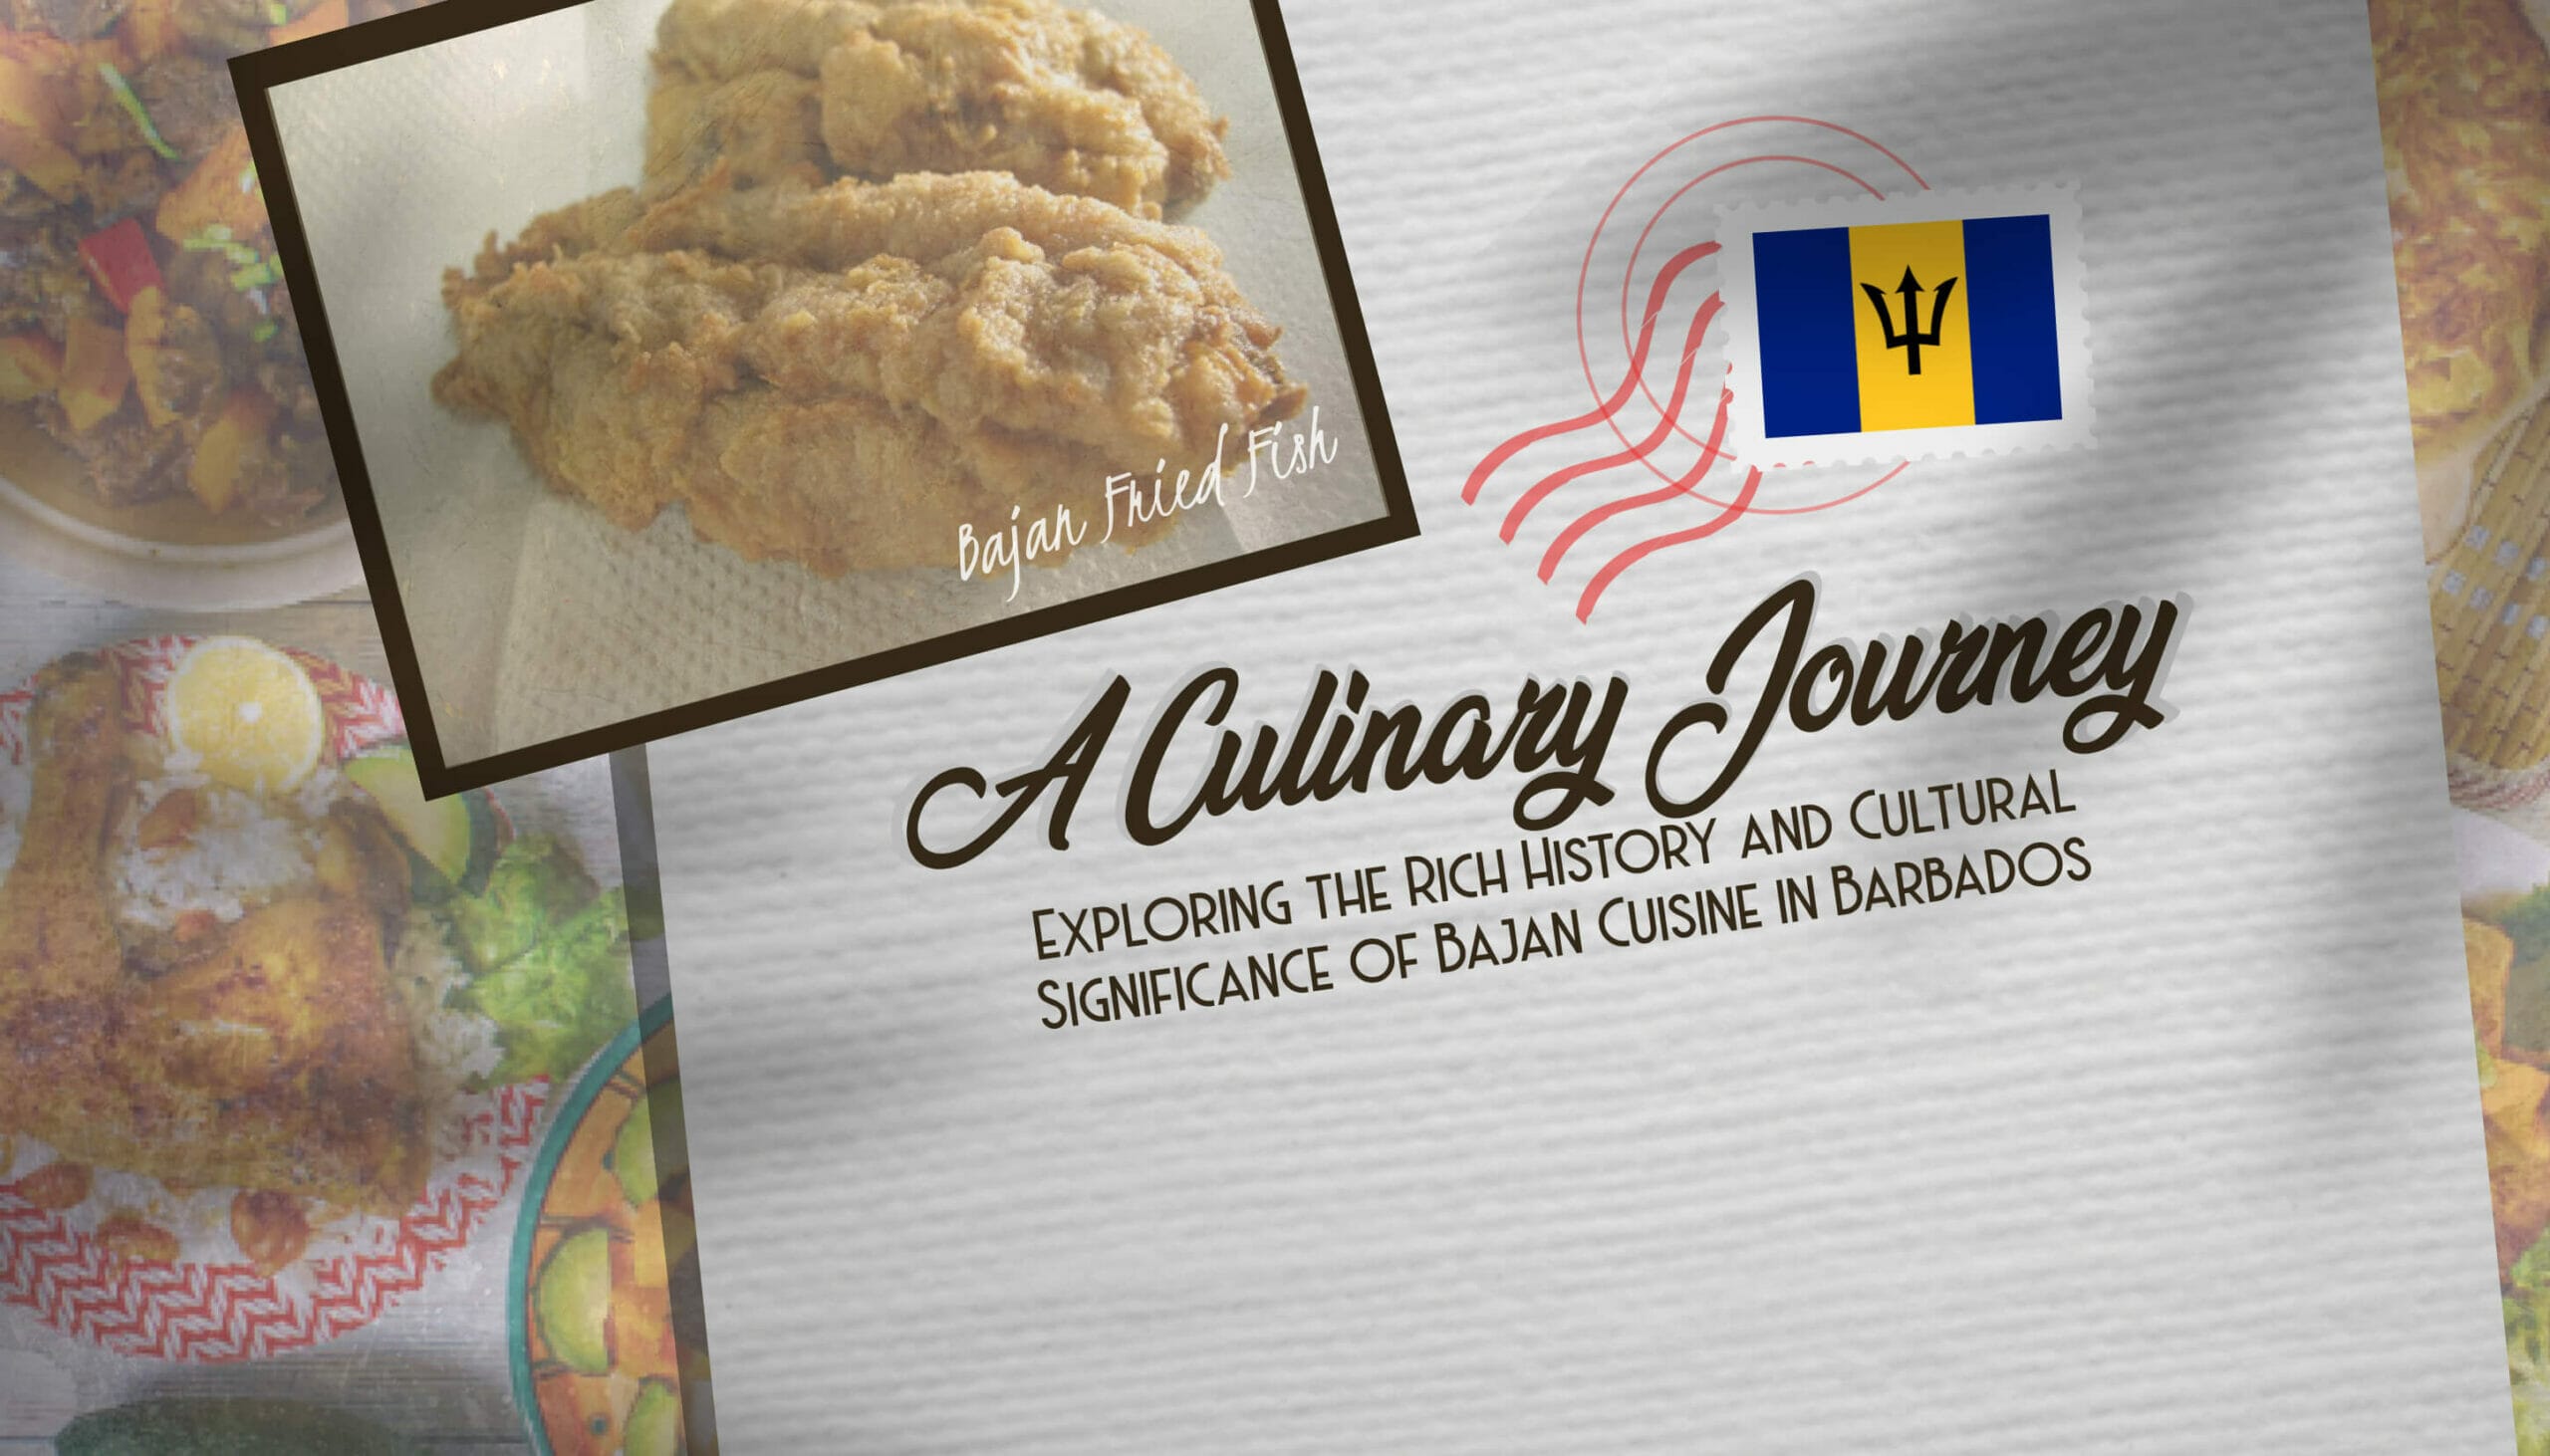 A Culinary Journey Exploring the Rich History and Cultural Significance of Bajan Cuisine in Barbados